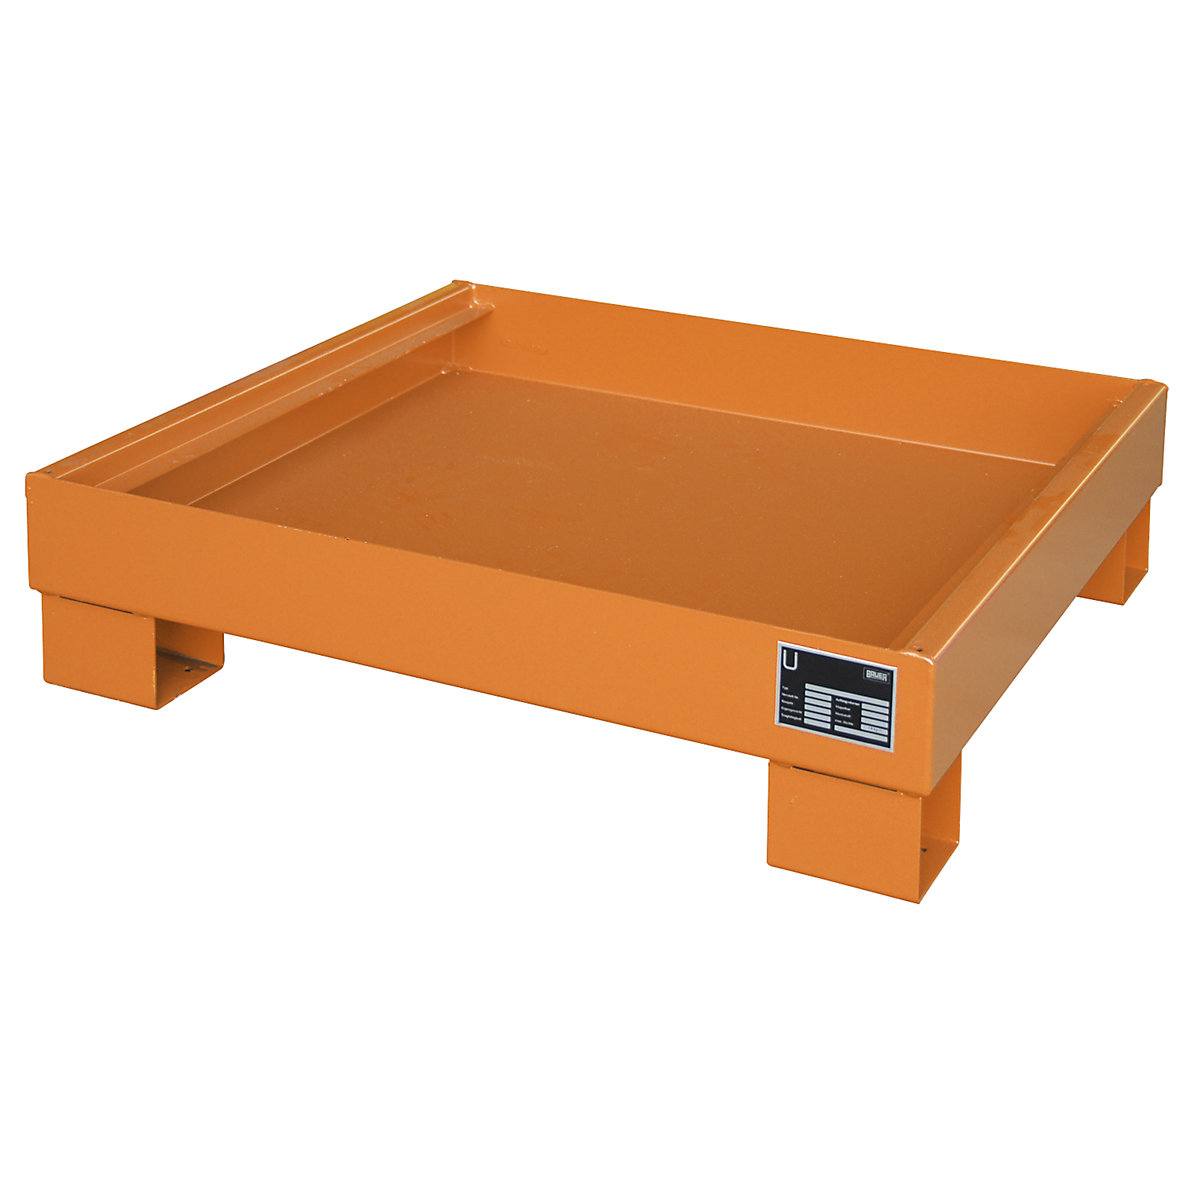 Steel sump tray for 60 l drum – eurokraft pro, LxWxH 800 x 900 x 220 mm, painted orange RAL 2000, without grate-6